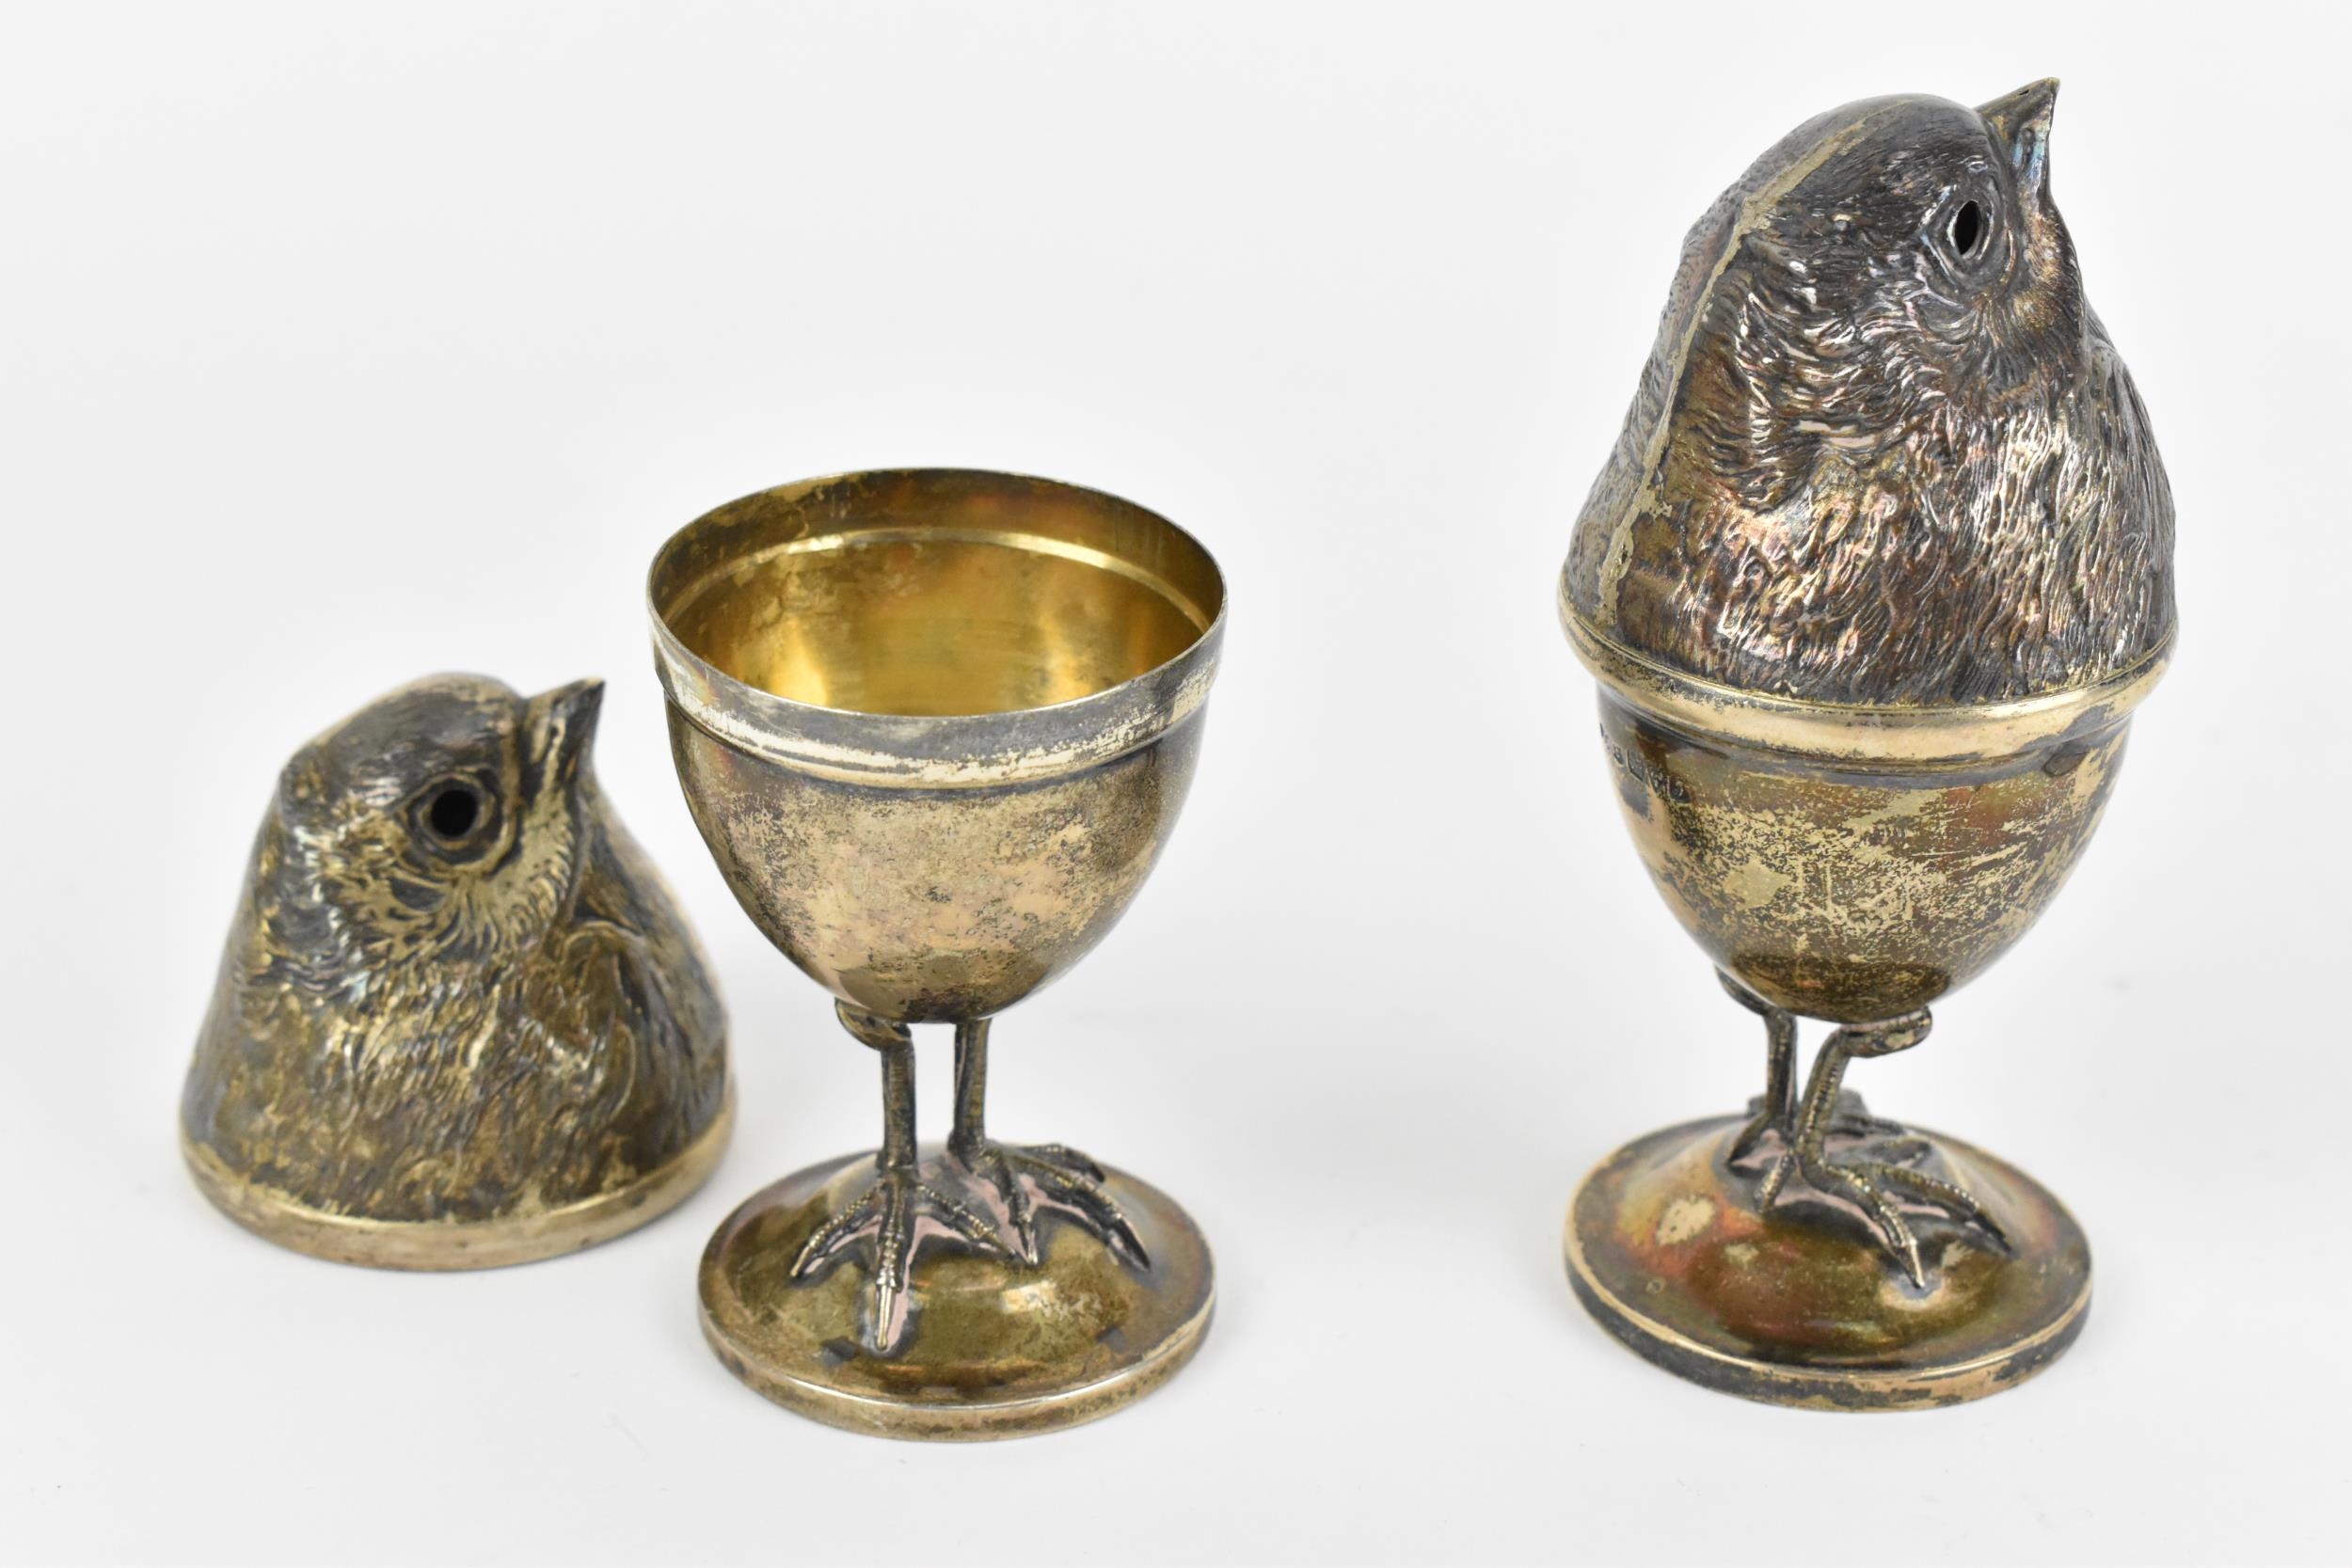 Two Edwardian silver novelty egg cups by Sampson Mordan & Co Ltd, Chester 1909, modelled as - Image 6 of 8